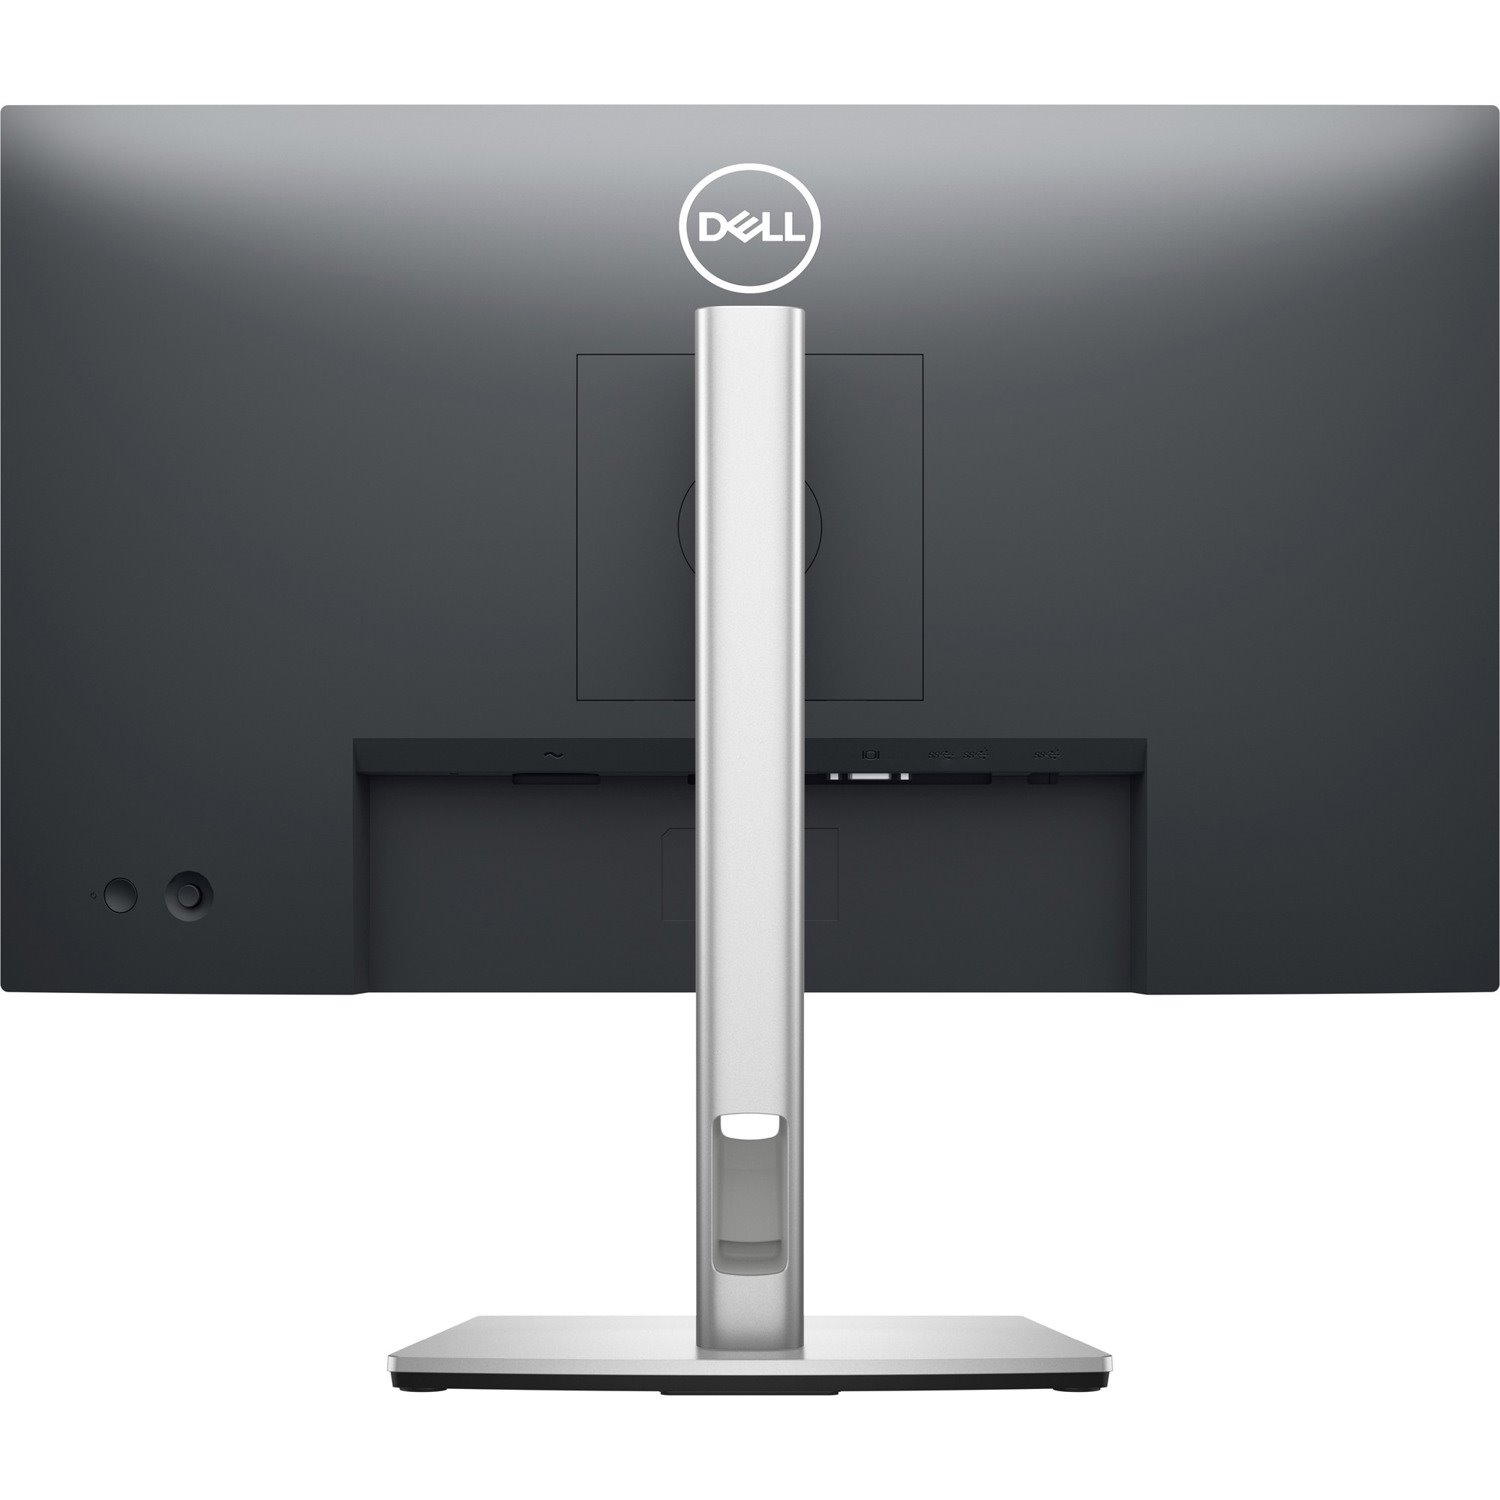 Dell P2422H 60.5 cm (23.8") LED LCD Monitor